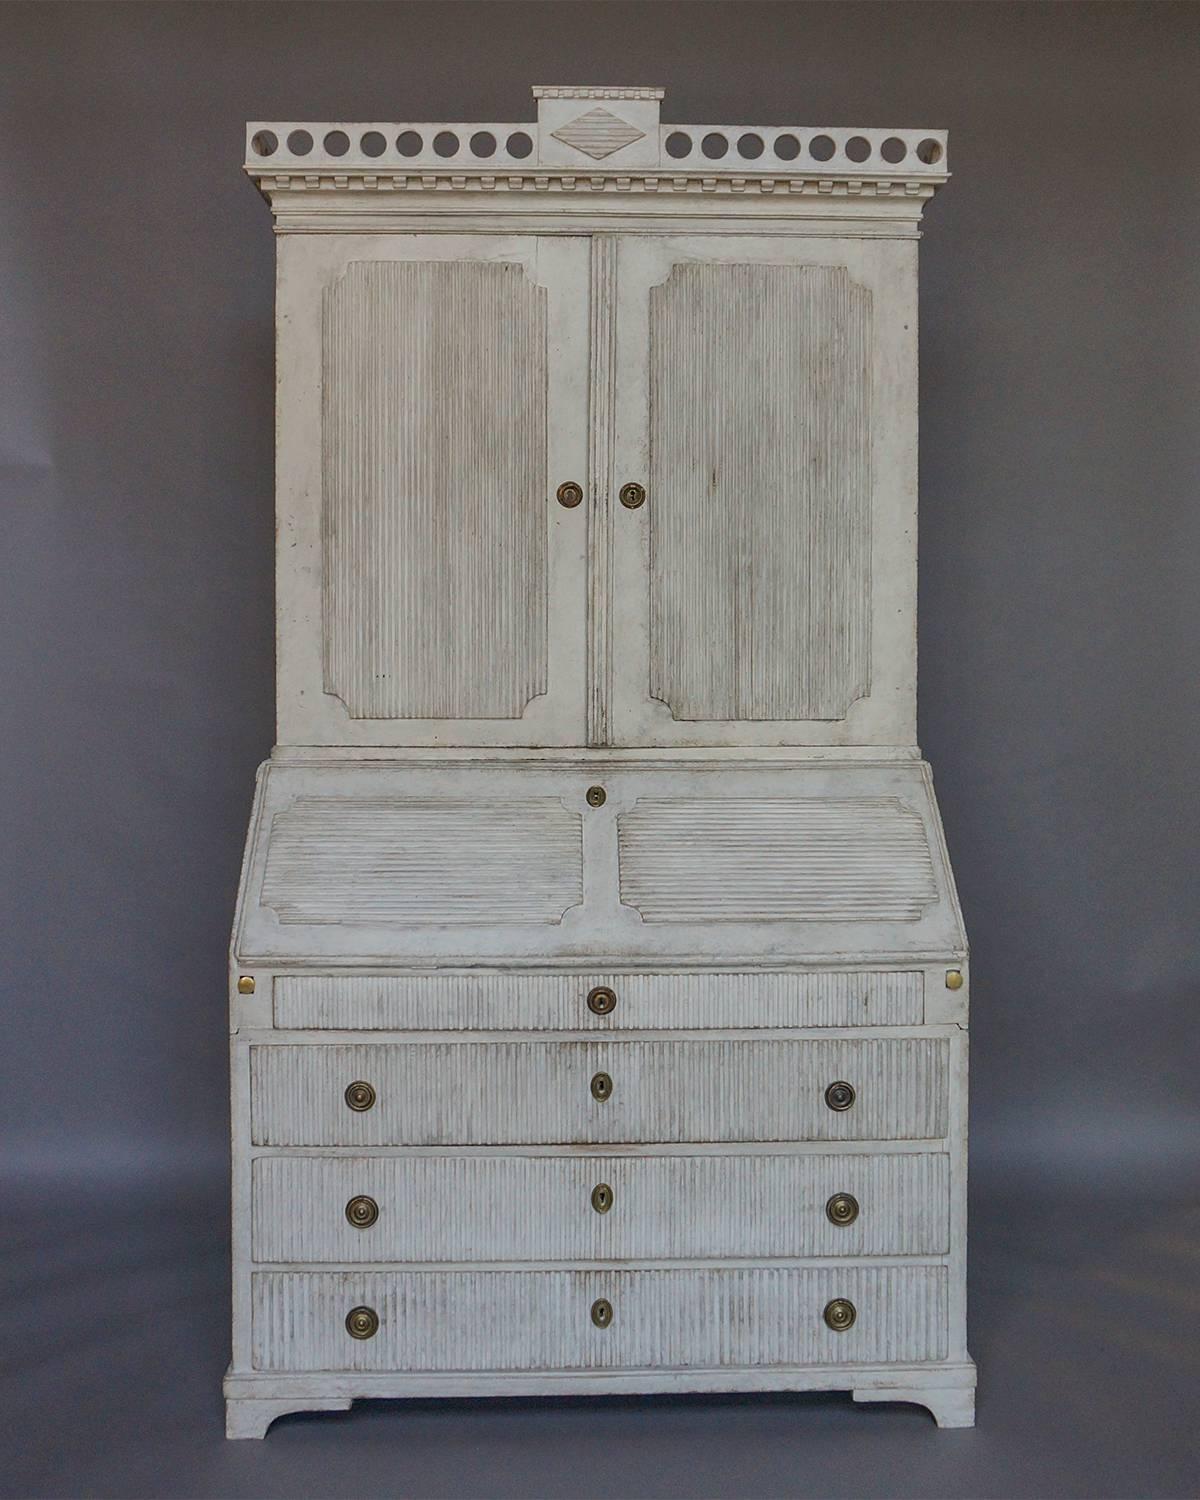 Period Gustavian secretary in two parts, Sweden, circa 1770. The upper section has double doors with raised, reeded panels opening onto three shelves and a locking compartment. At the top is a pierced cornice with central reeded lozenge.

The